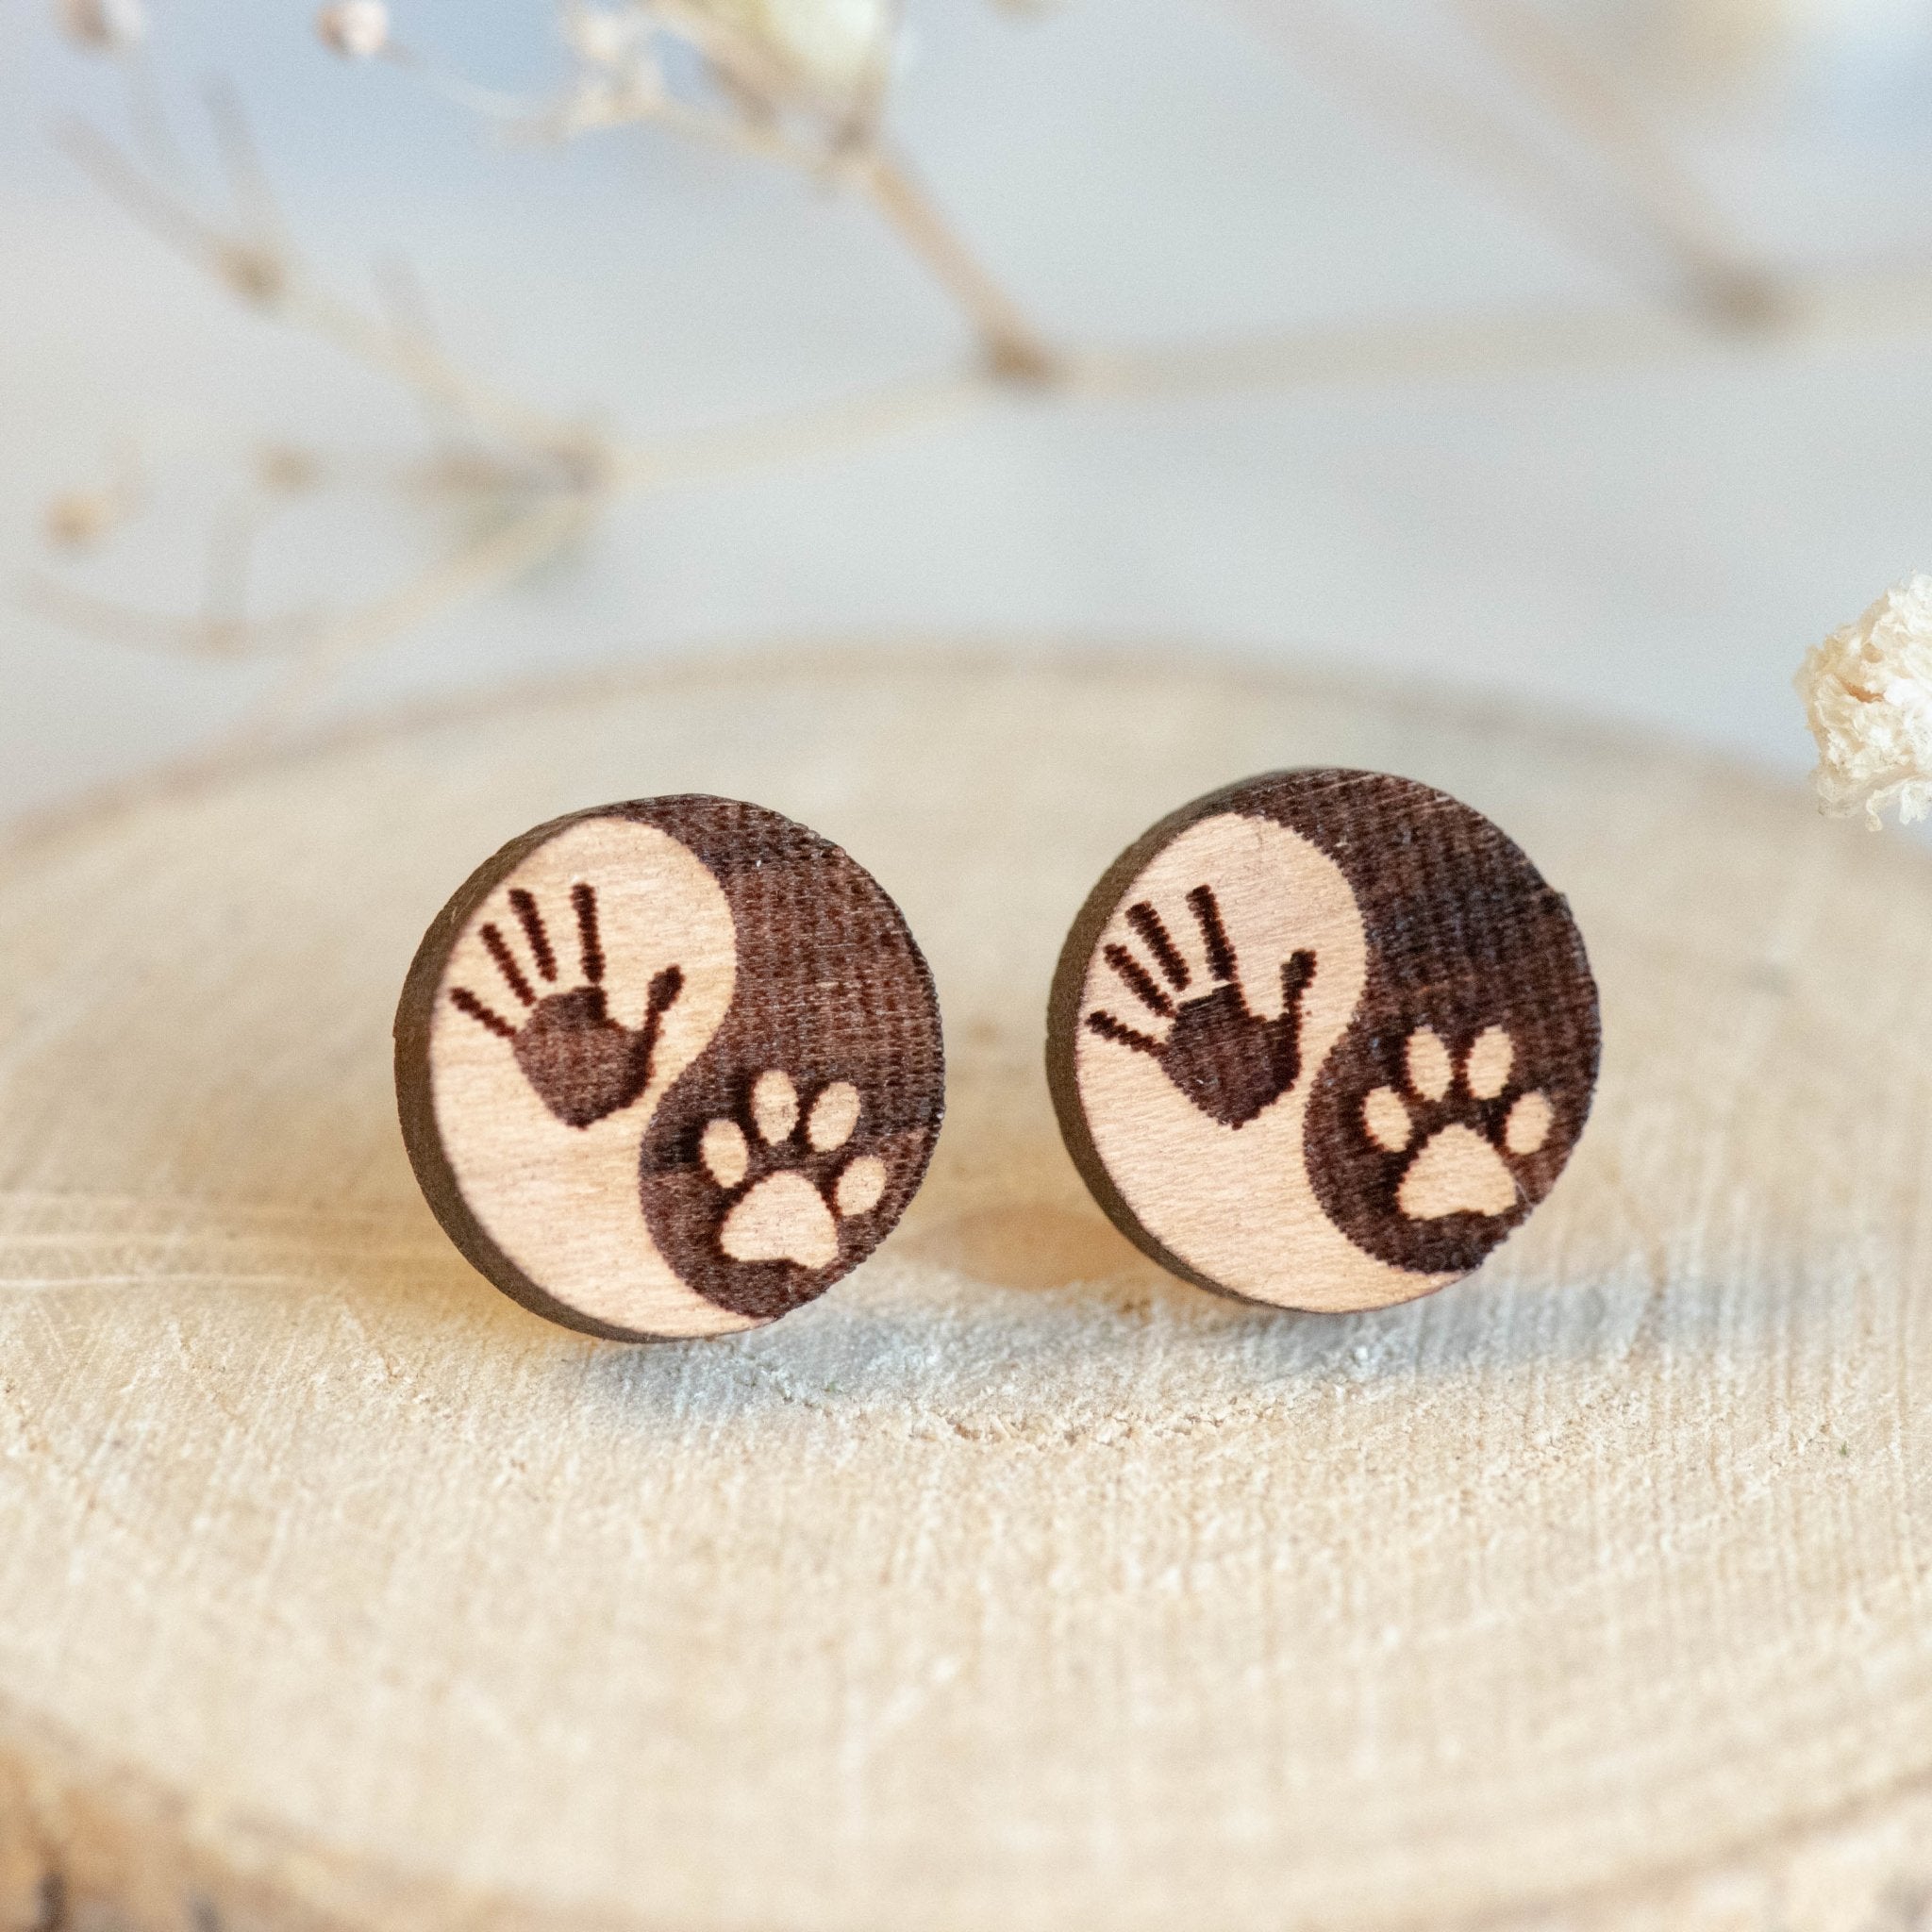 Yin Yang Hand & Paw Cherry Wood Stud Earrings - ET15001 - Robin Valley Official Store